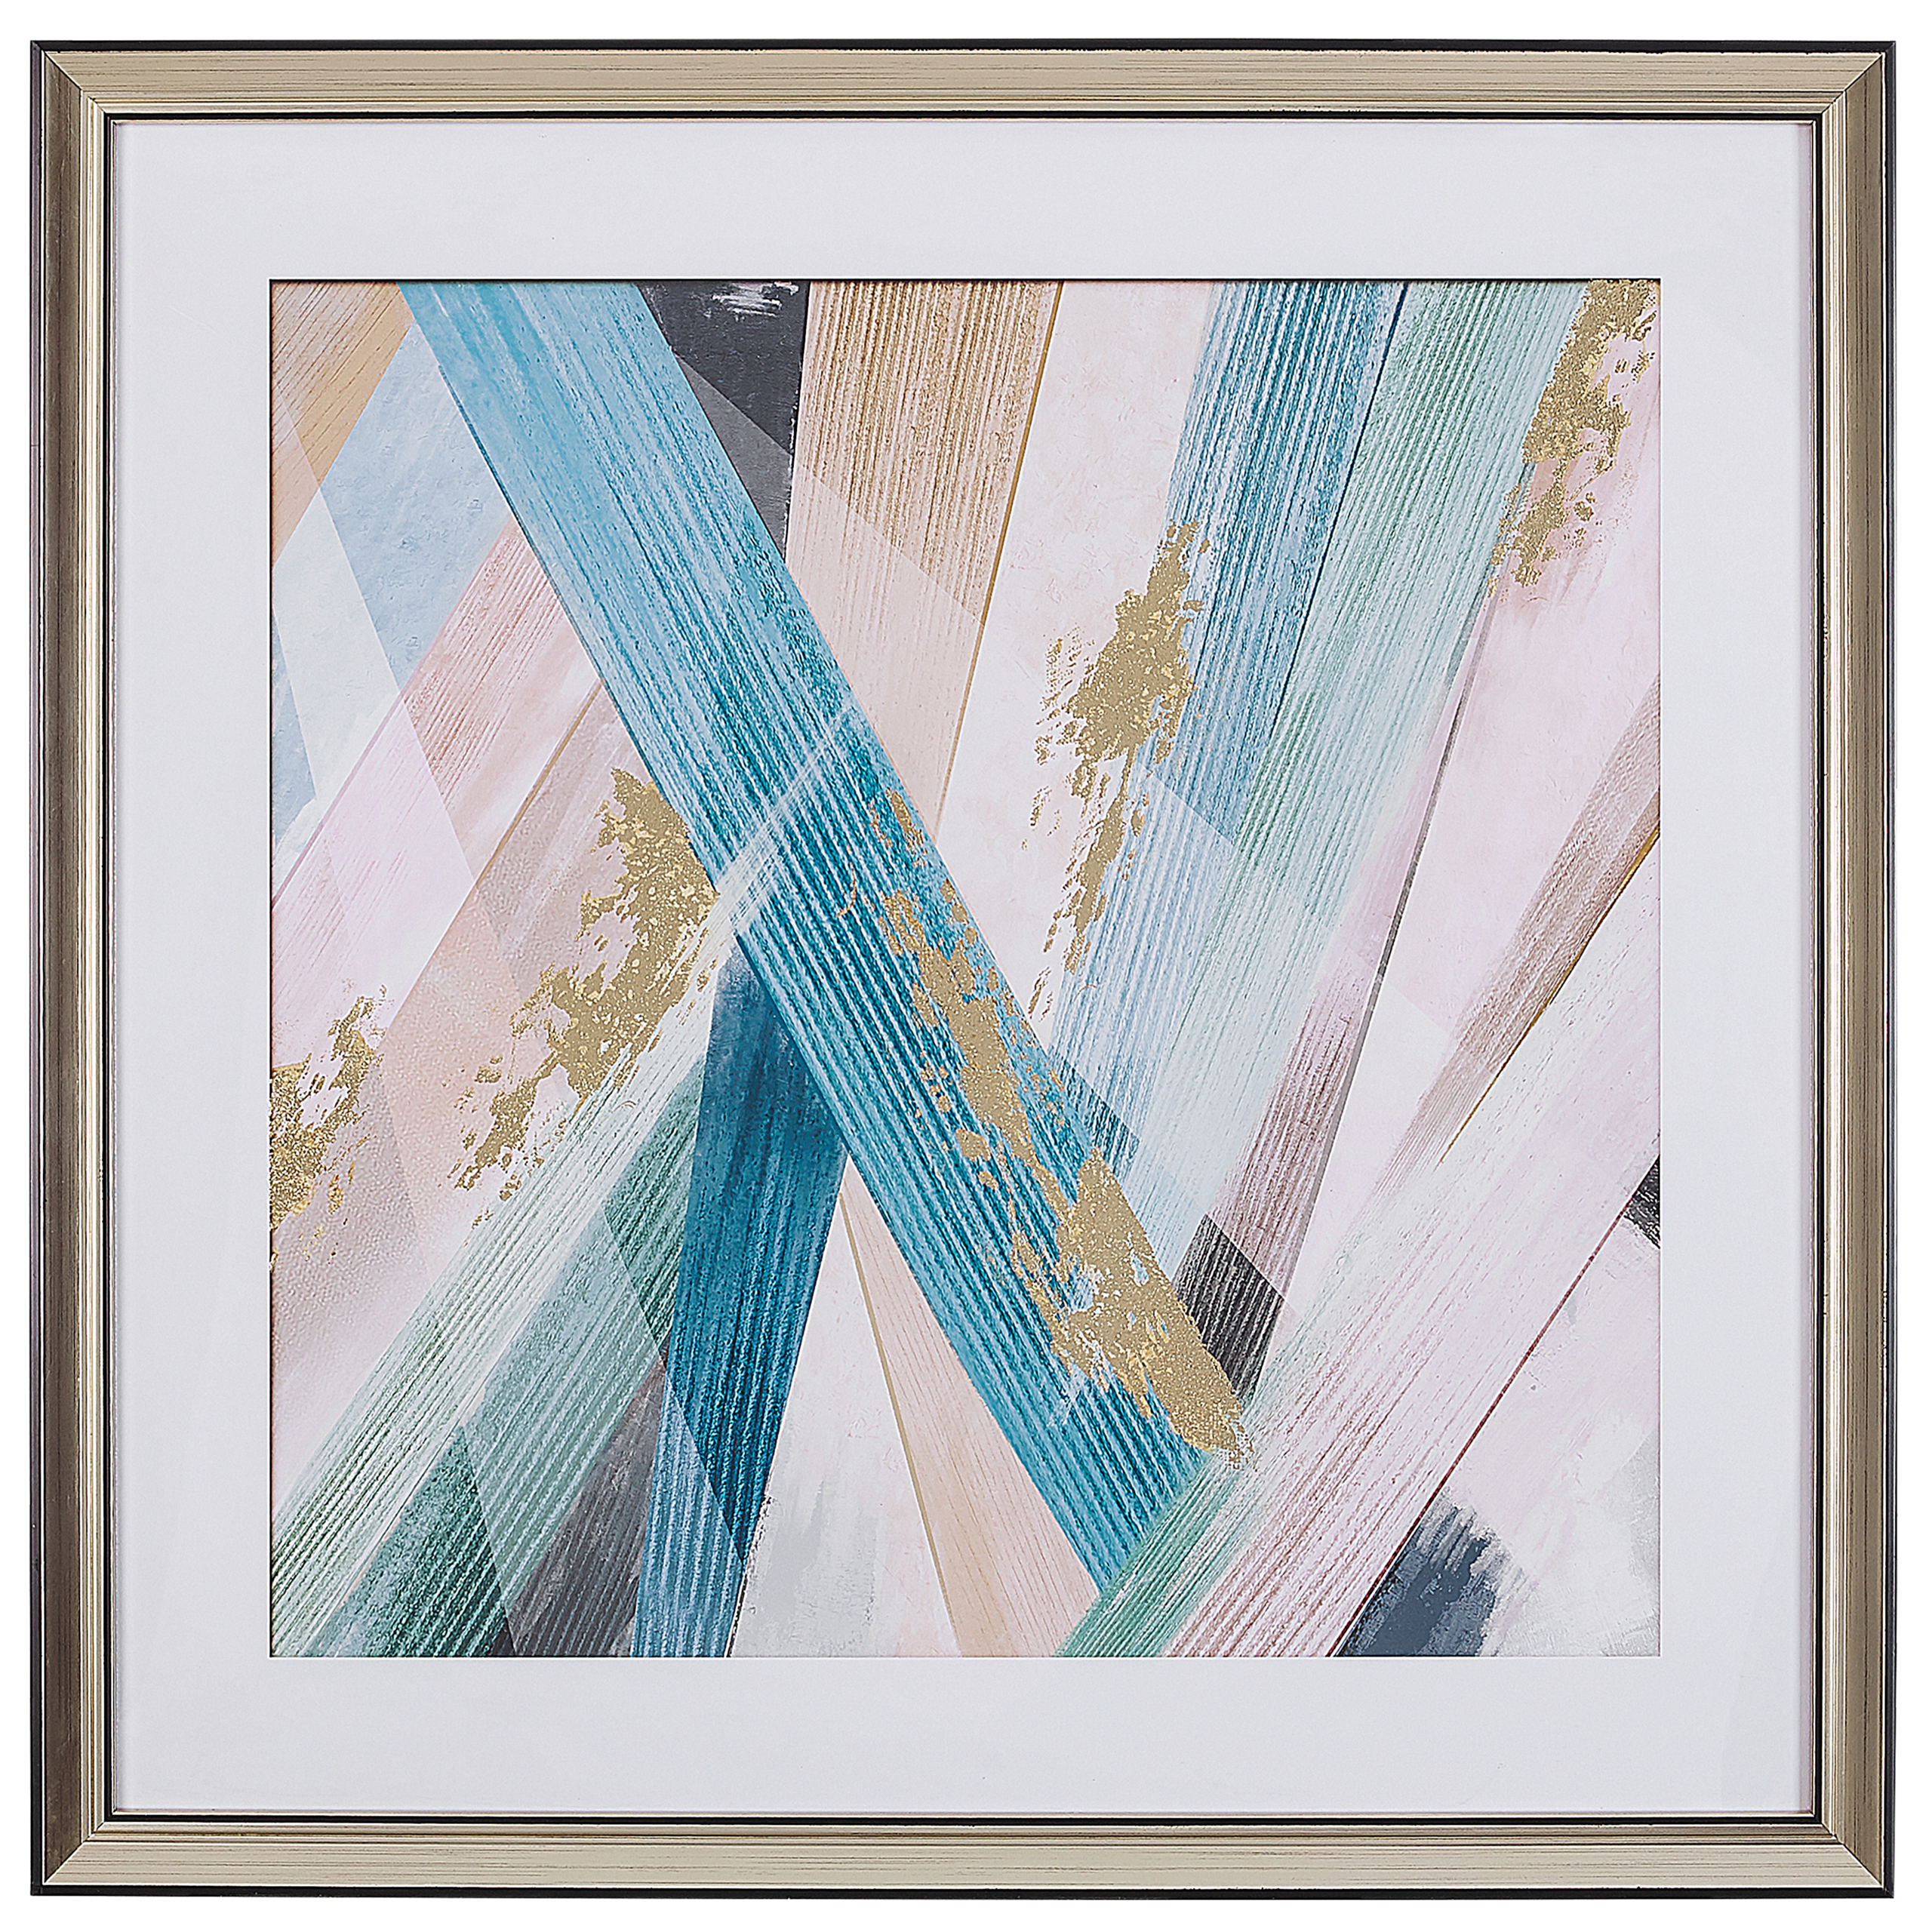 Beliani Framed Wall Art Milticolour Print on Paper 60 x 60 cm Passe-partout Frame Abstract Theme